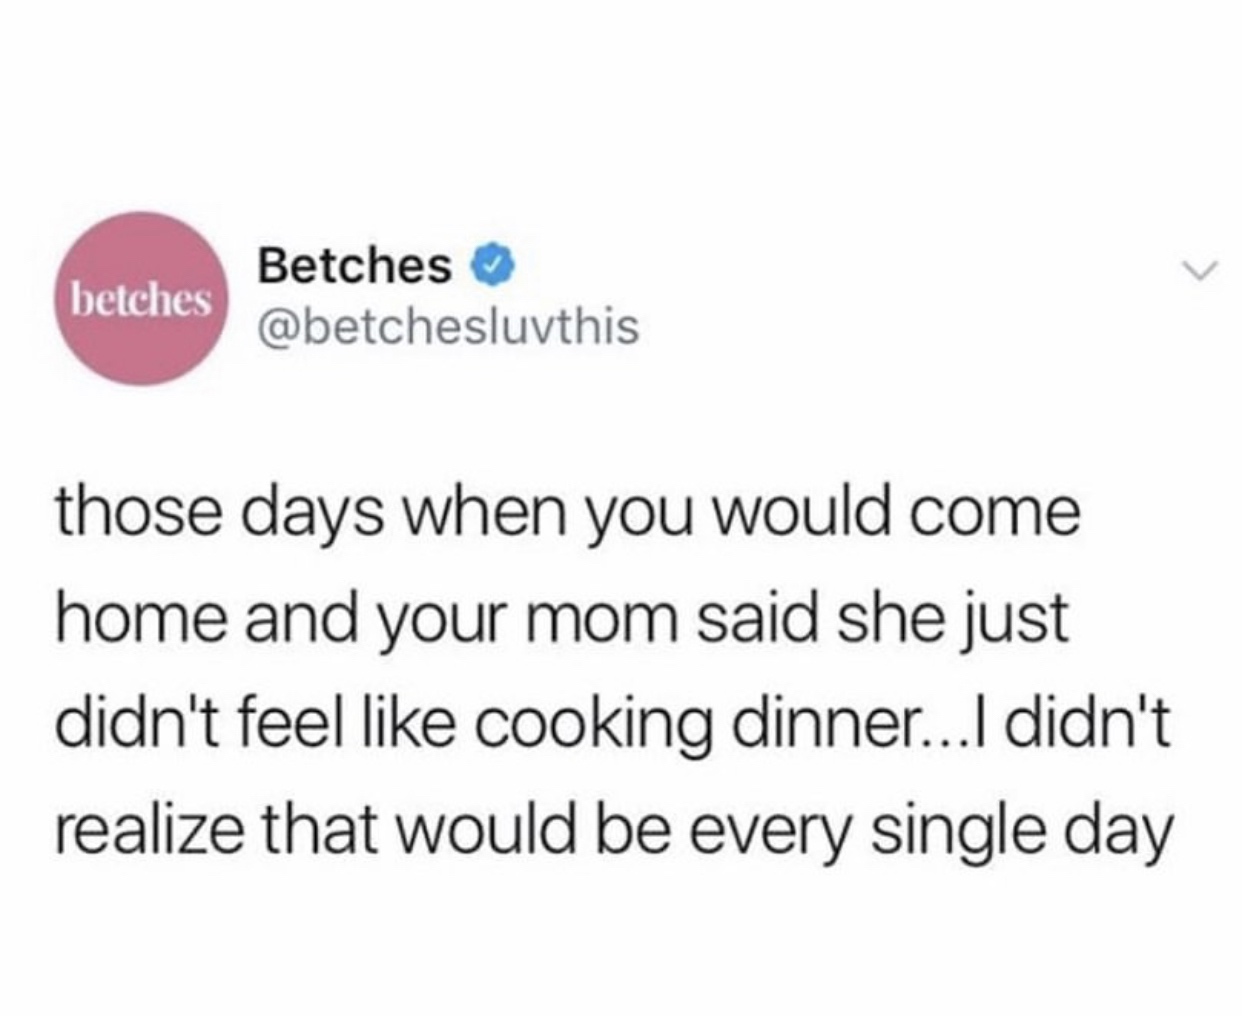 angle - betches Betches those days when you would come home and your mom said she just didn't feel cooking dinner... I didn't realize that would be every single day